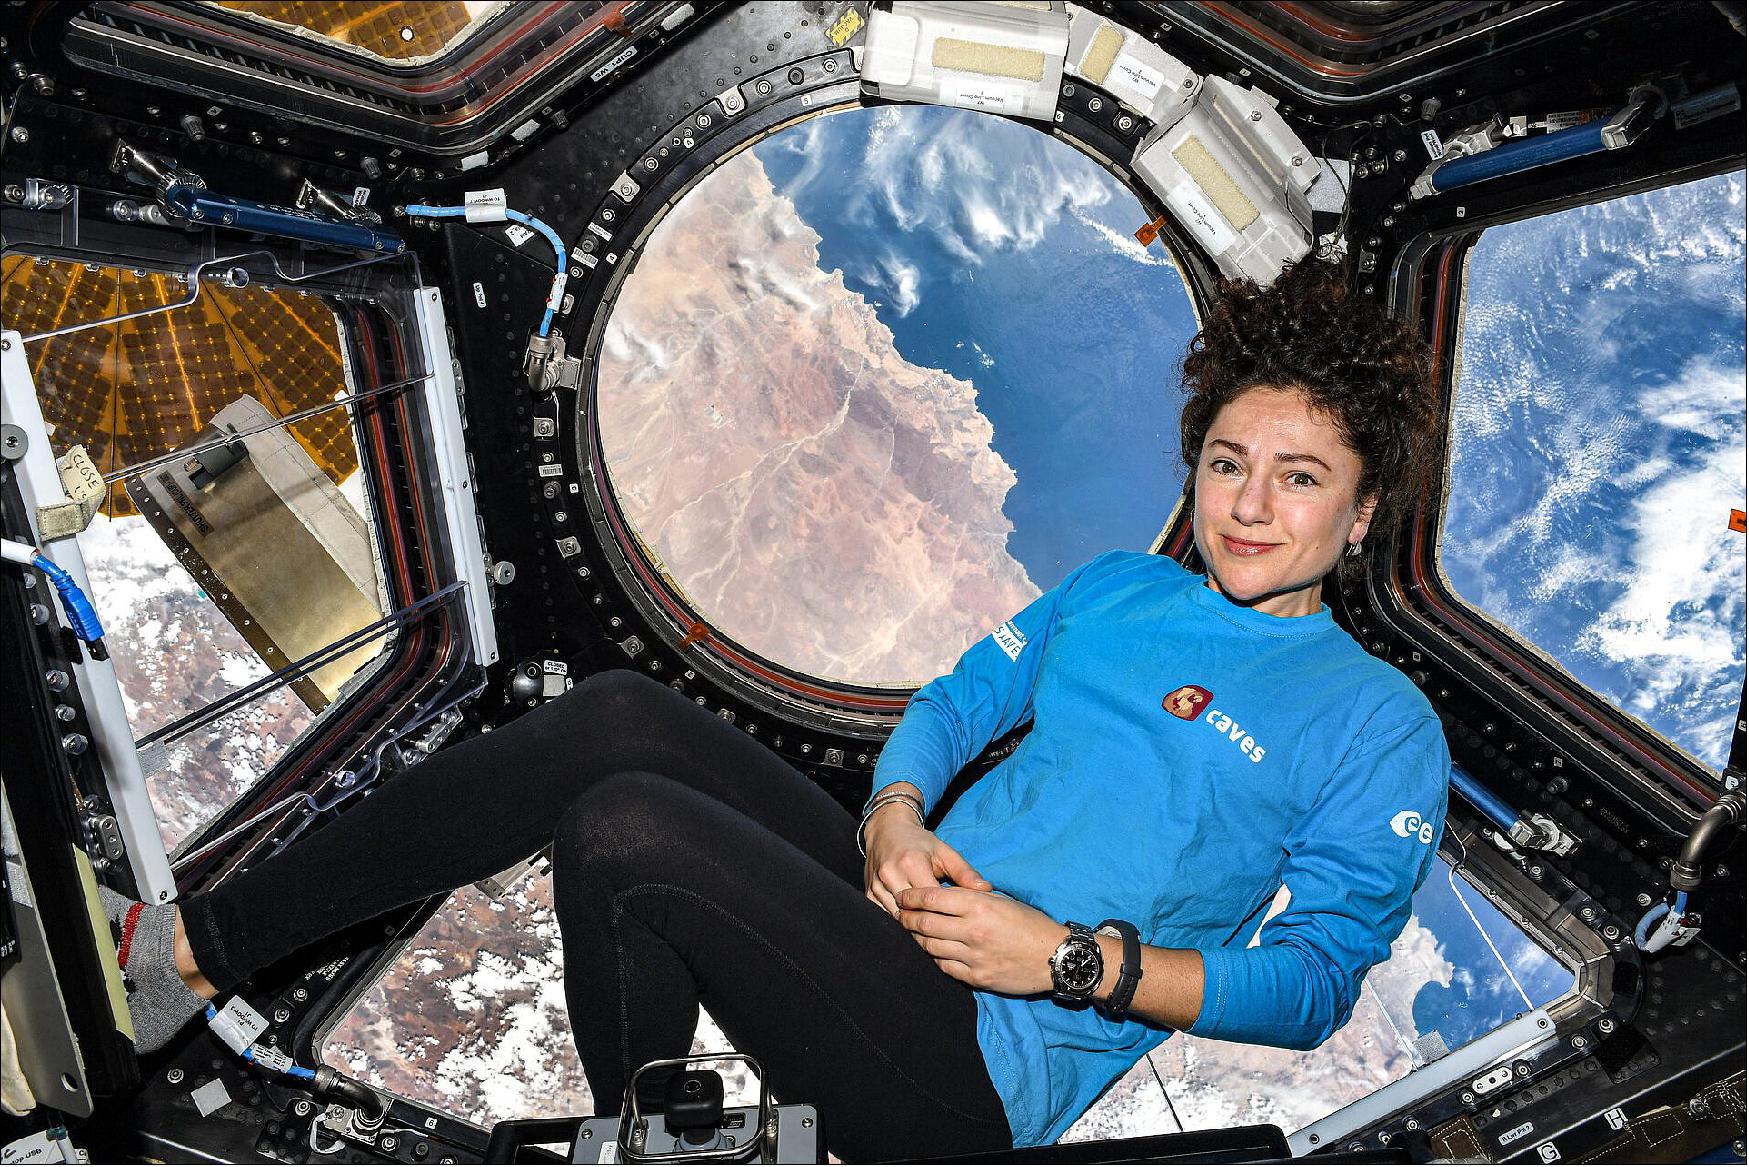 Figure 9: NASA astronaut Jessica Meir rocks her CAVES shirt in the Cupola on the International Space Station (image credit: NASA)